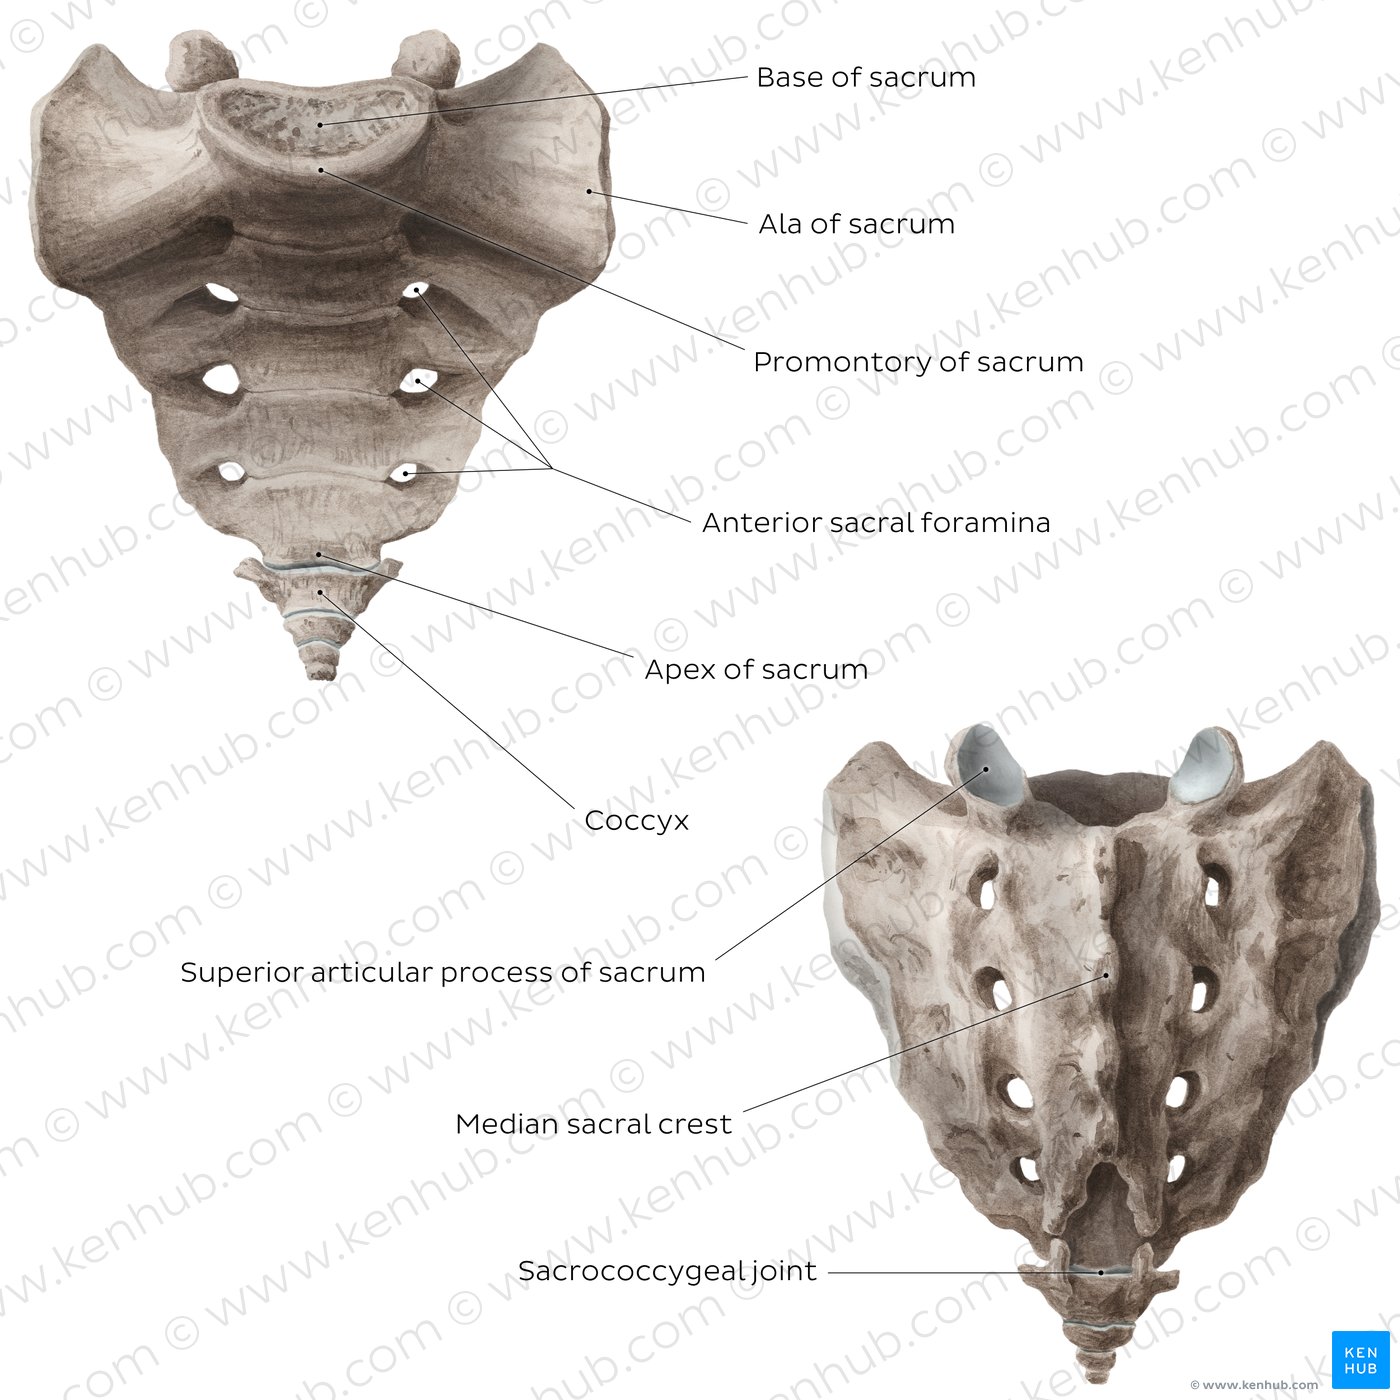 Figure 5. Sacrum and coccyx (overview)